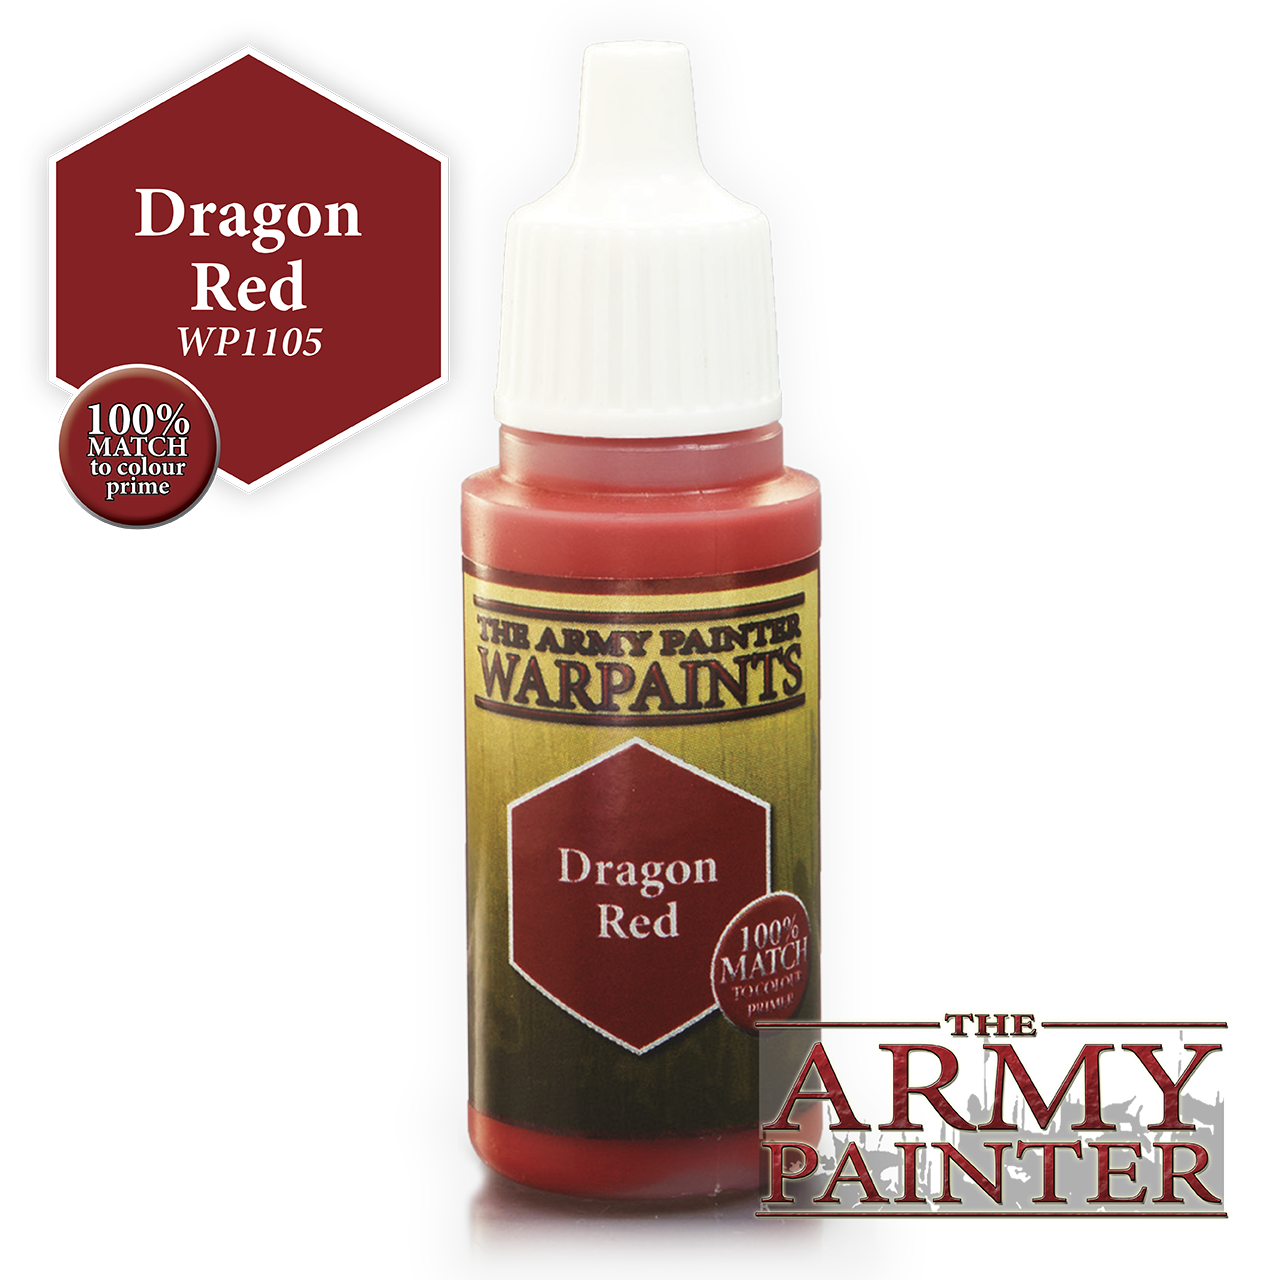 The Army Painter Warpaints: Dragon Red (18ml)